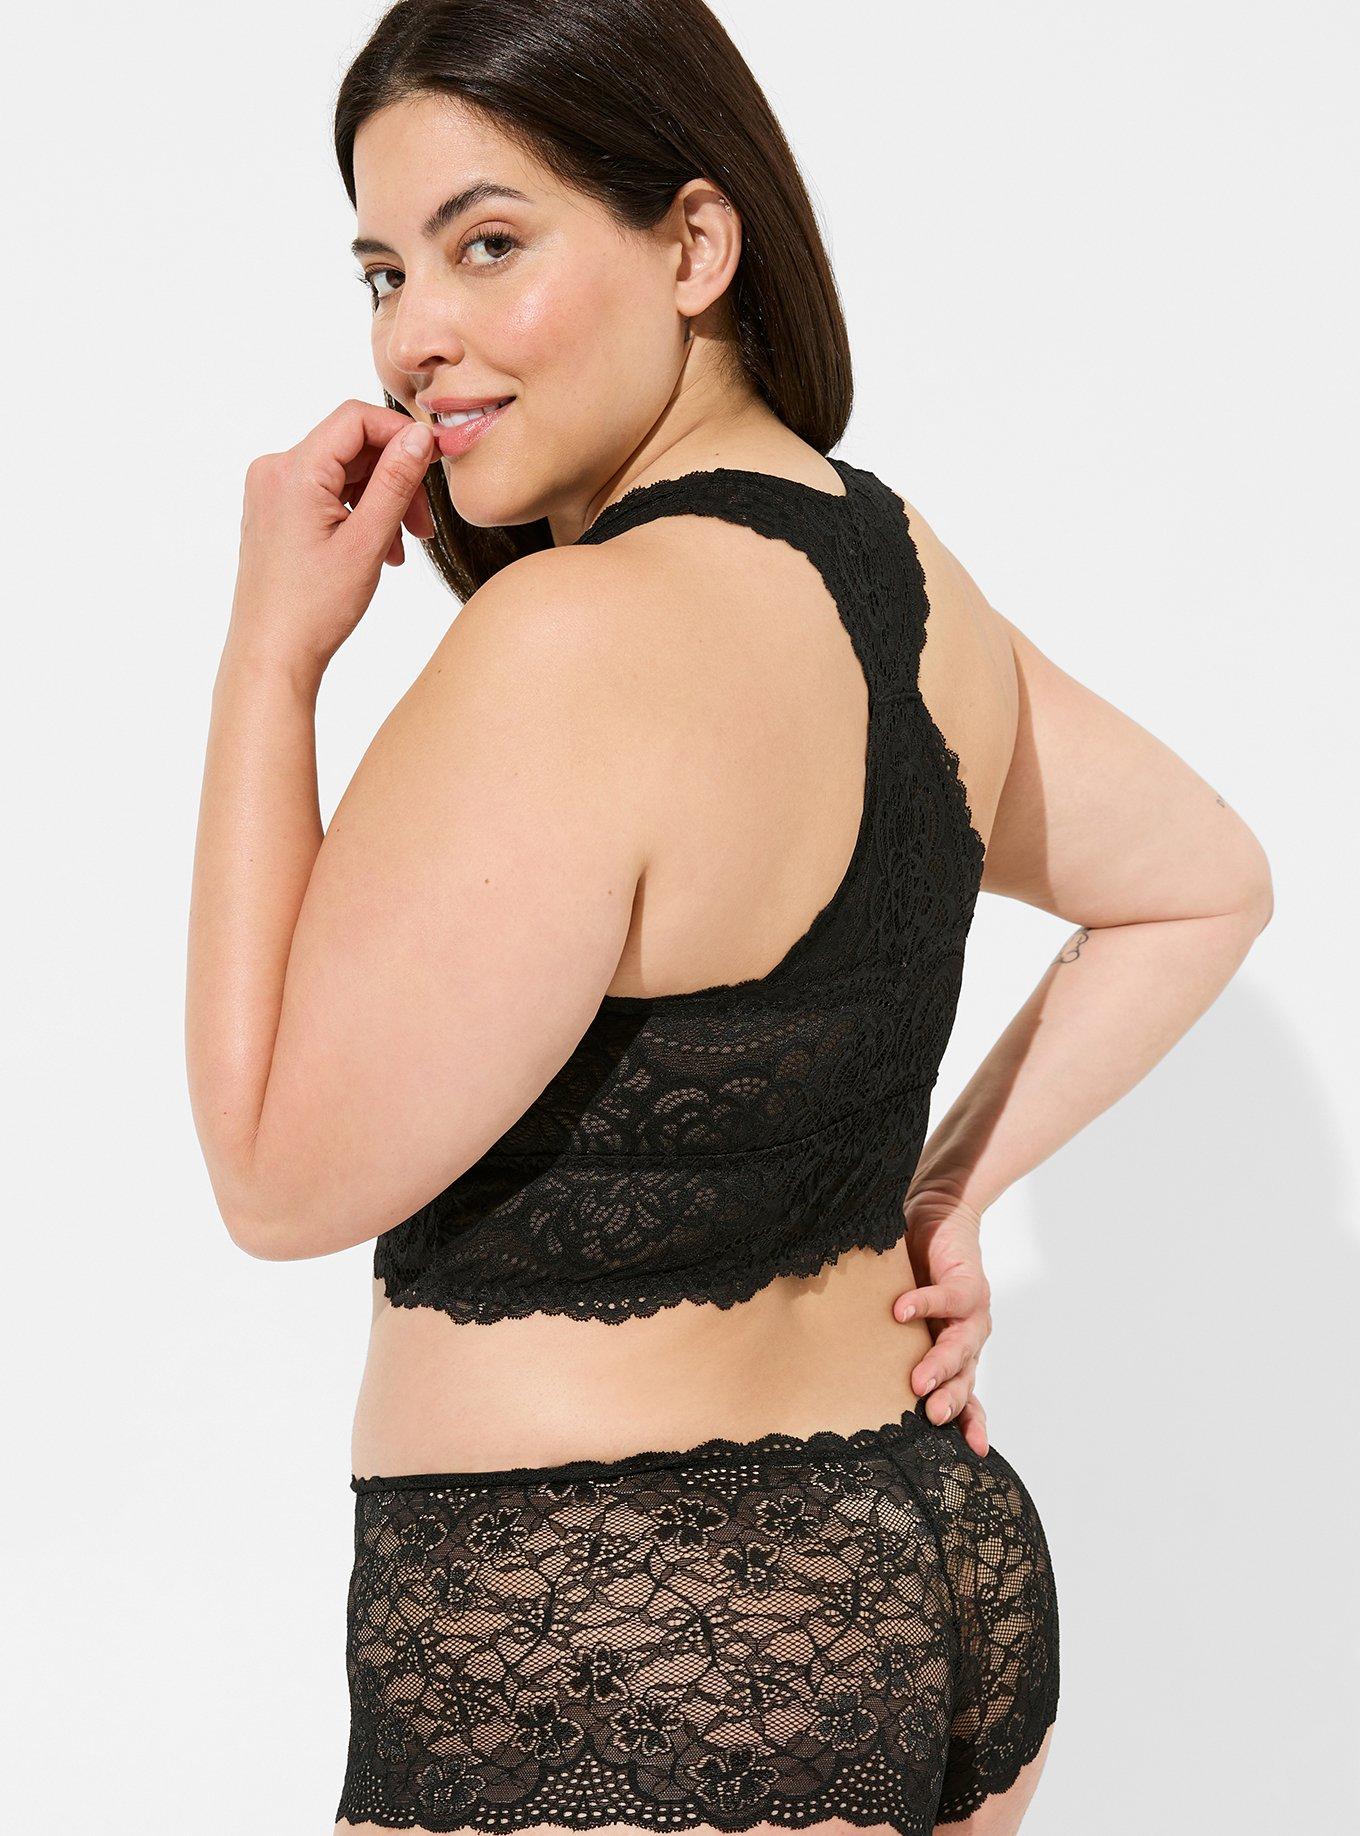 Plus Size - Floral Lace Cheeky Panty With Open Back Slit - Torrid